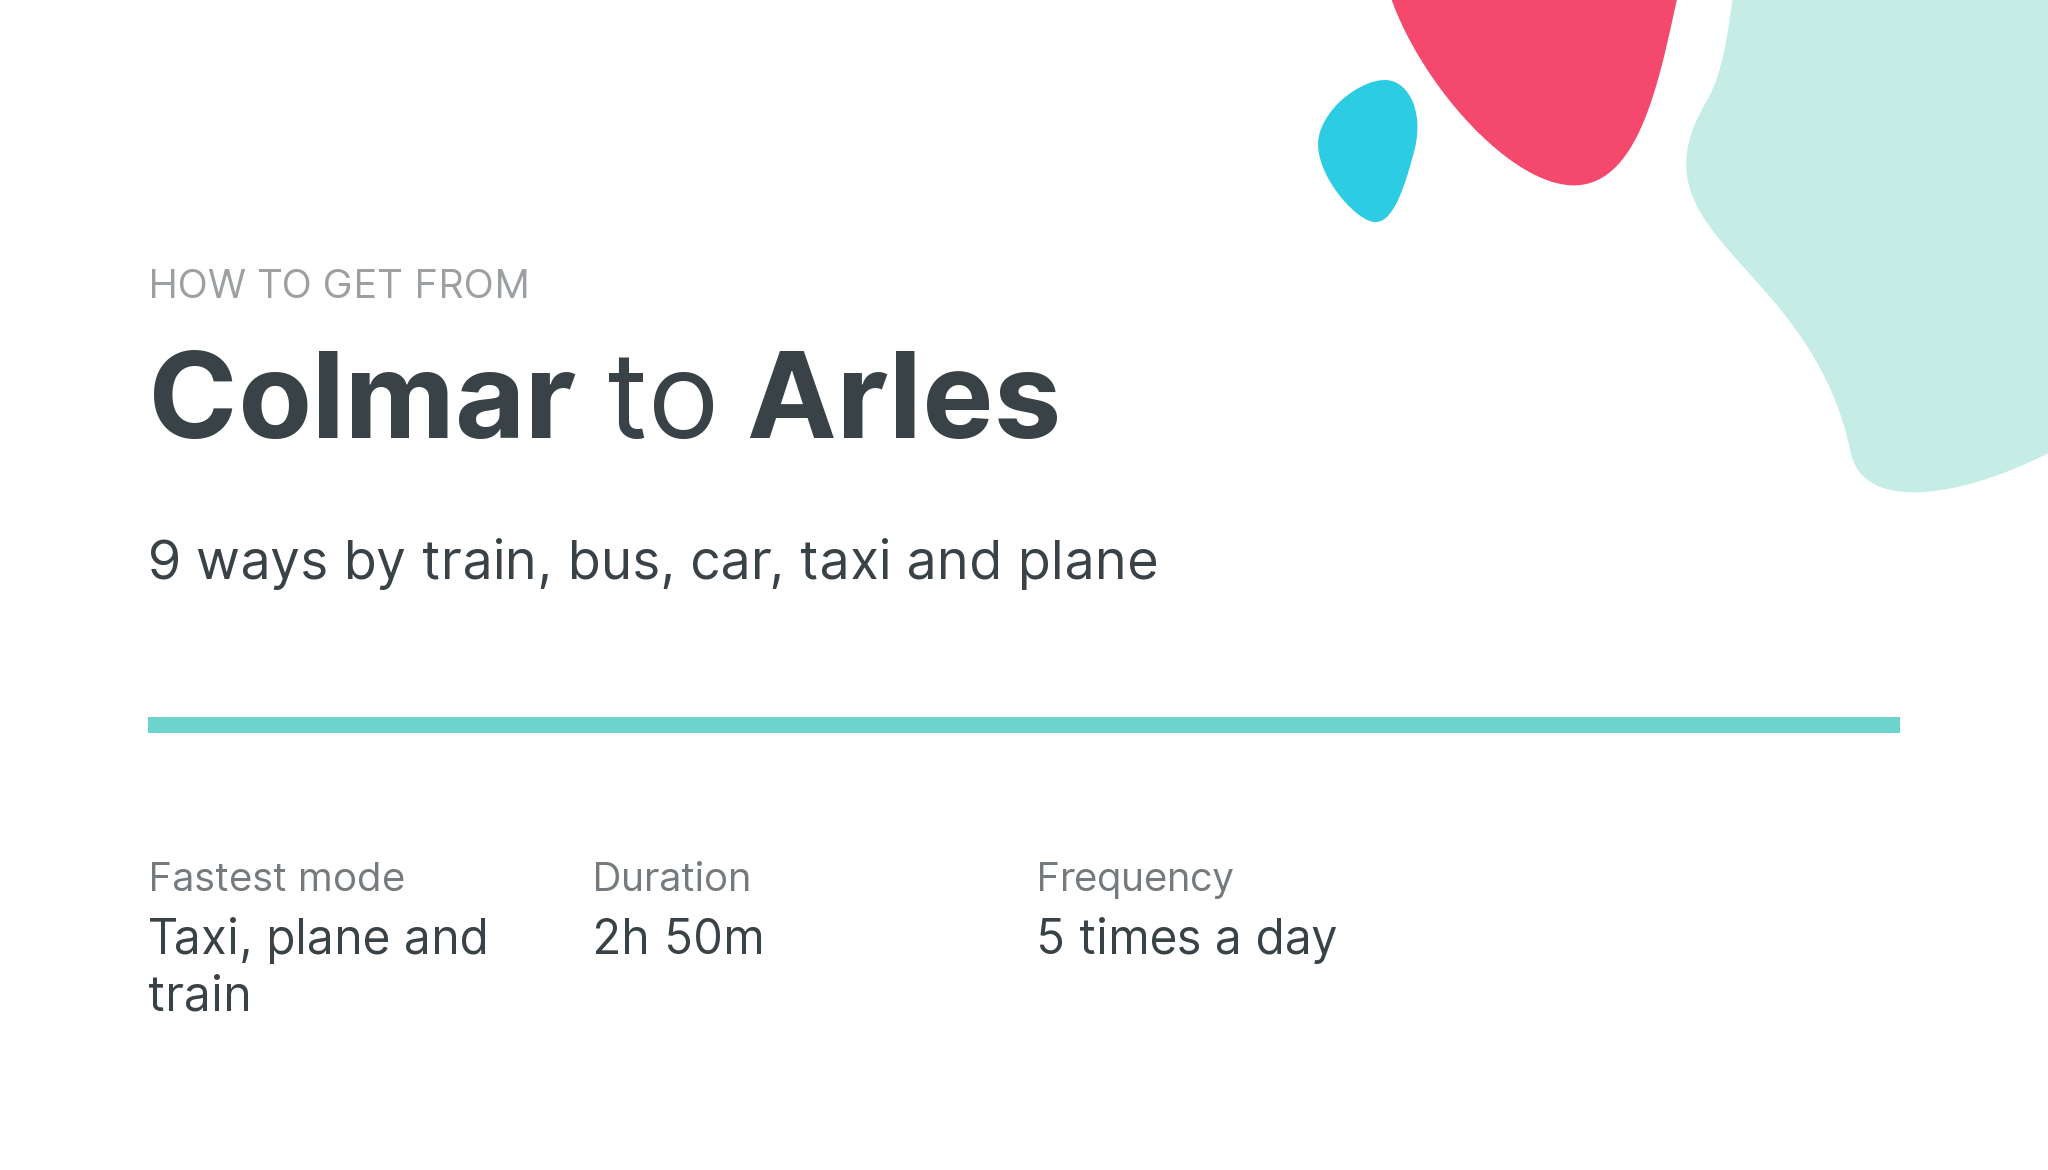 How do I get from Colmar to Arles